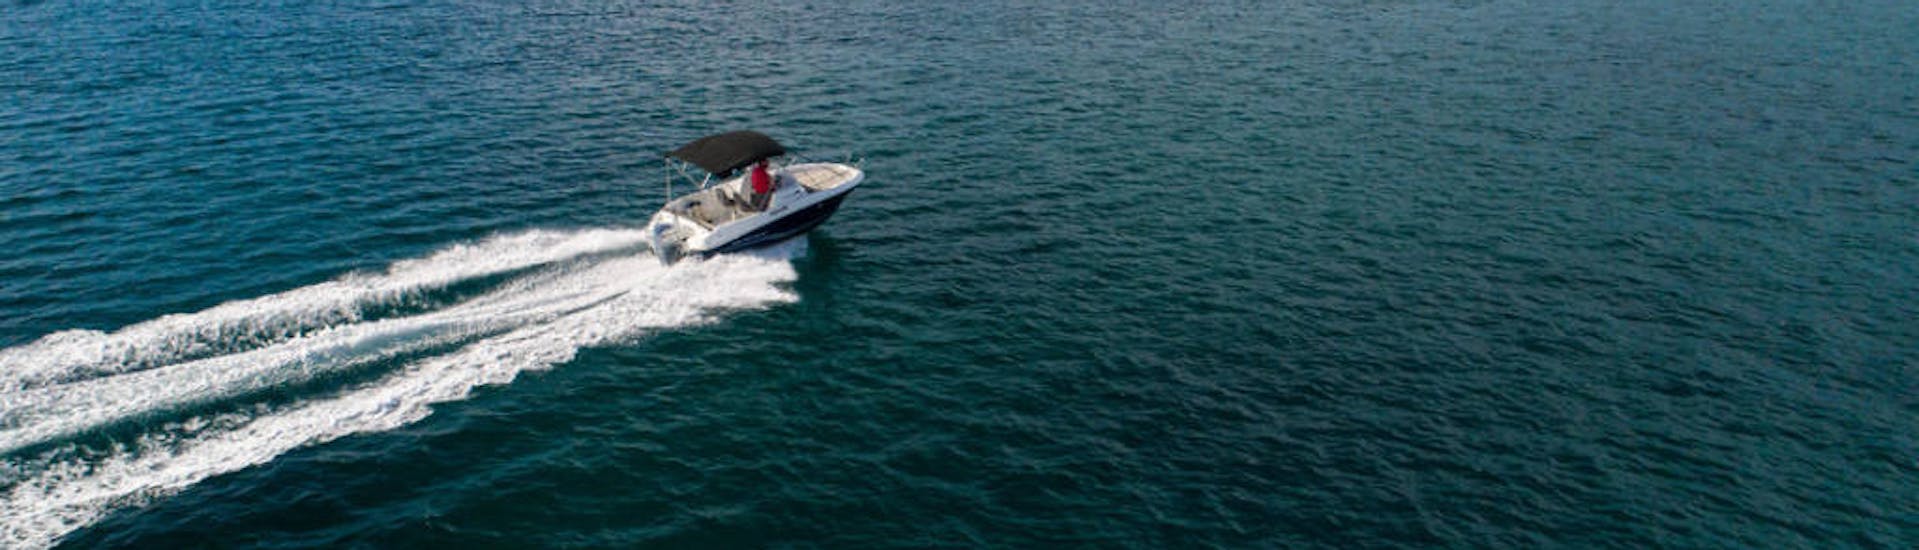 Boat rides along the coast at boat rental in Medulin (up to 6 people) with Zoom Boats Istria.